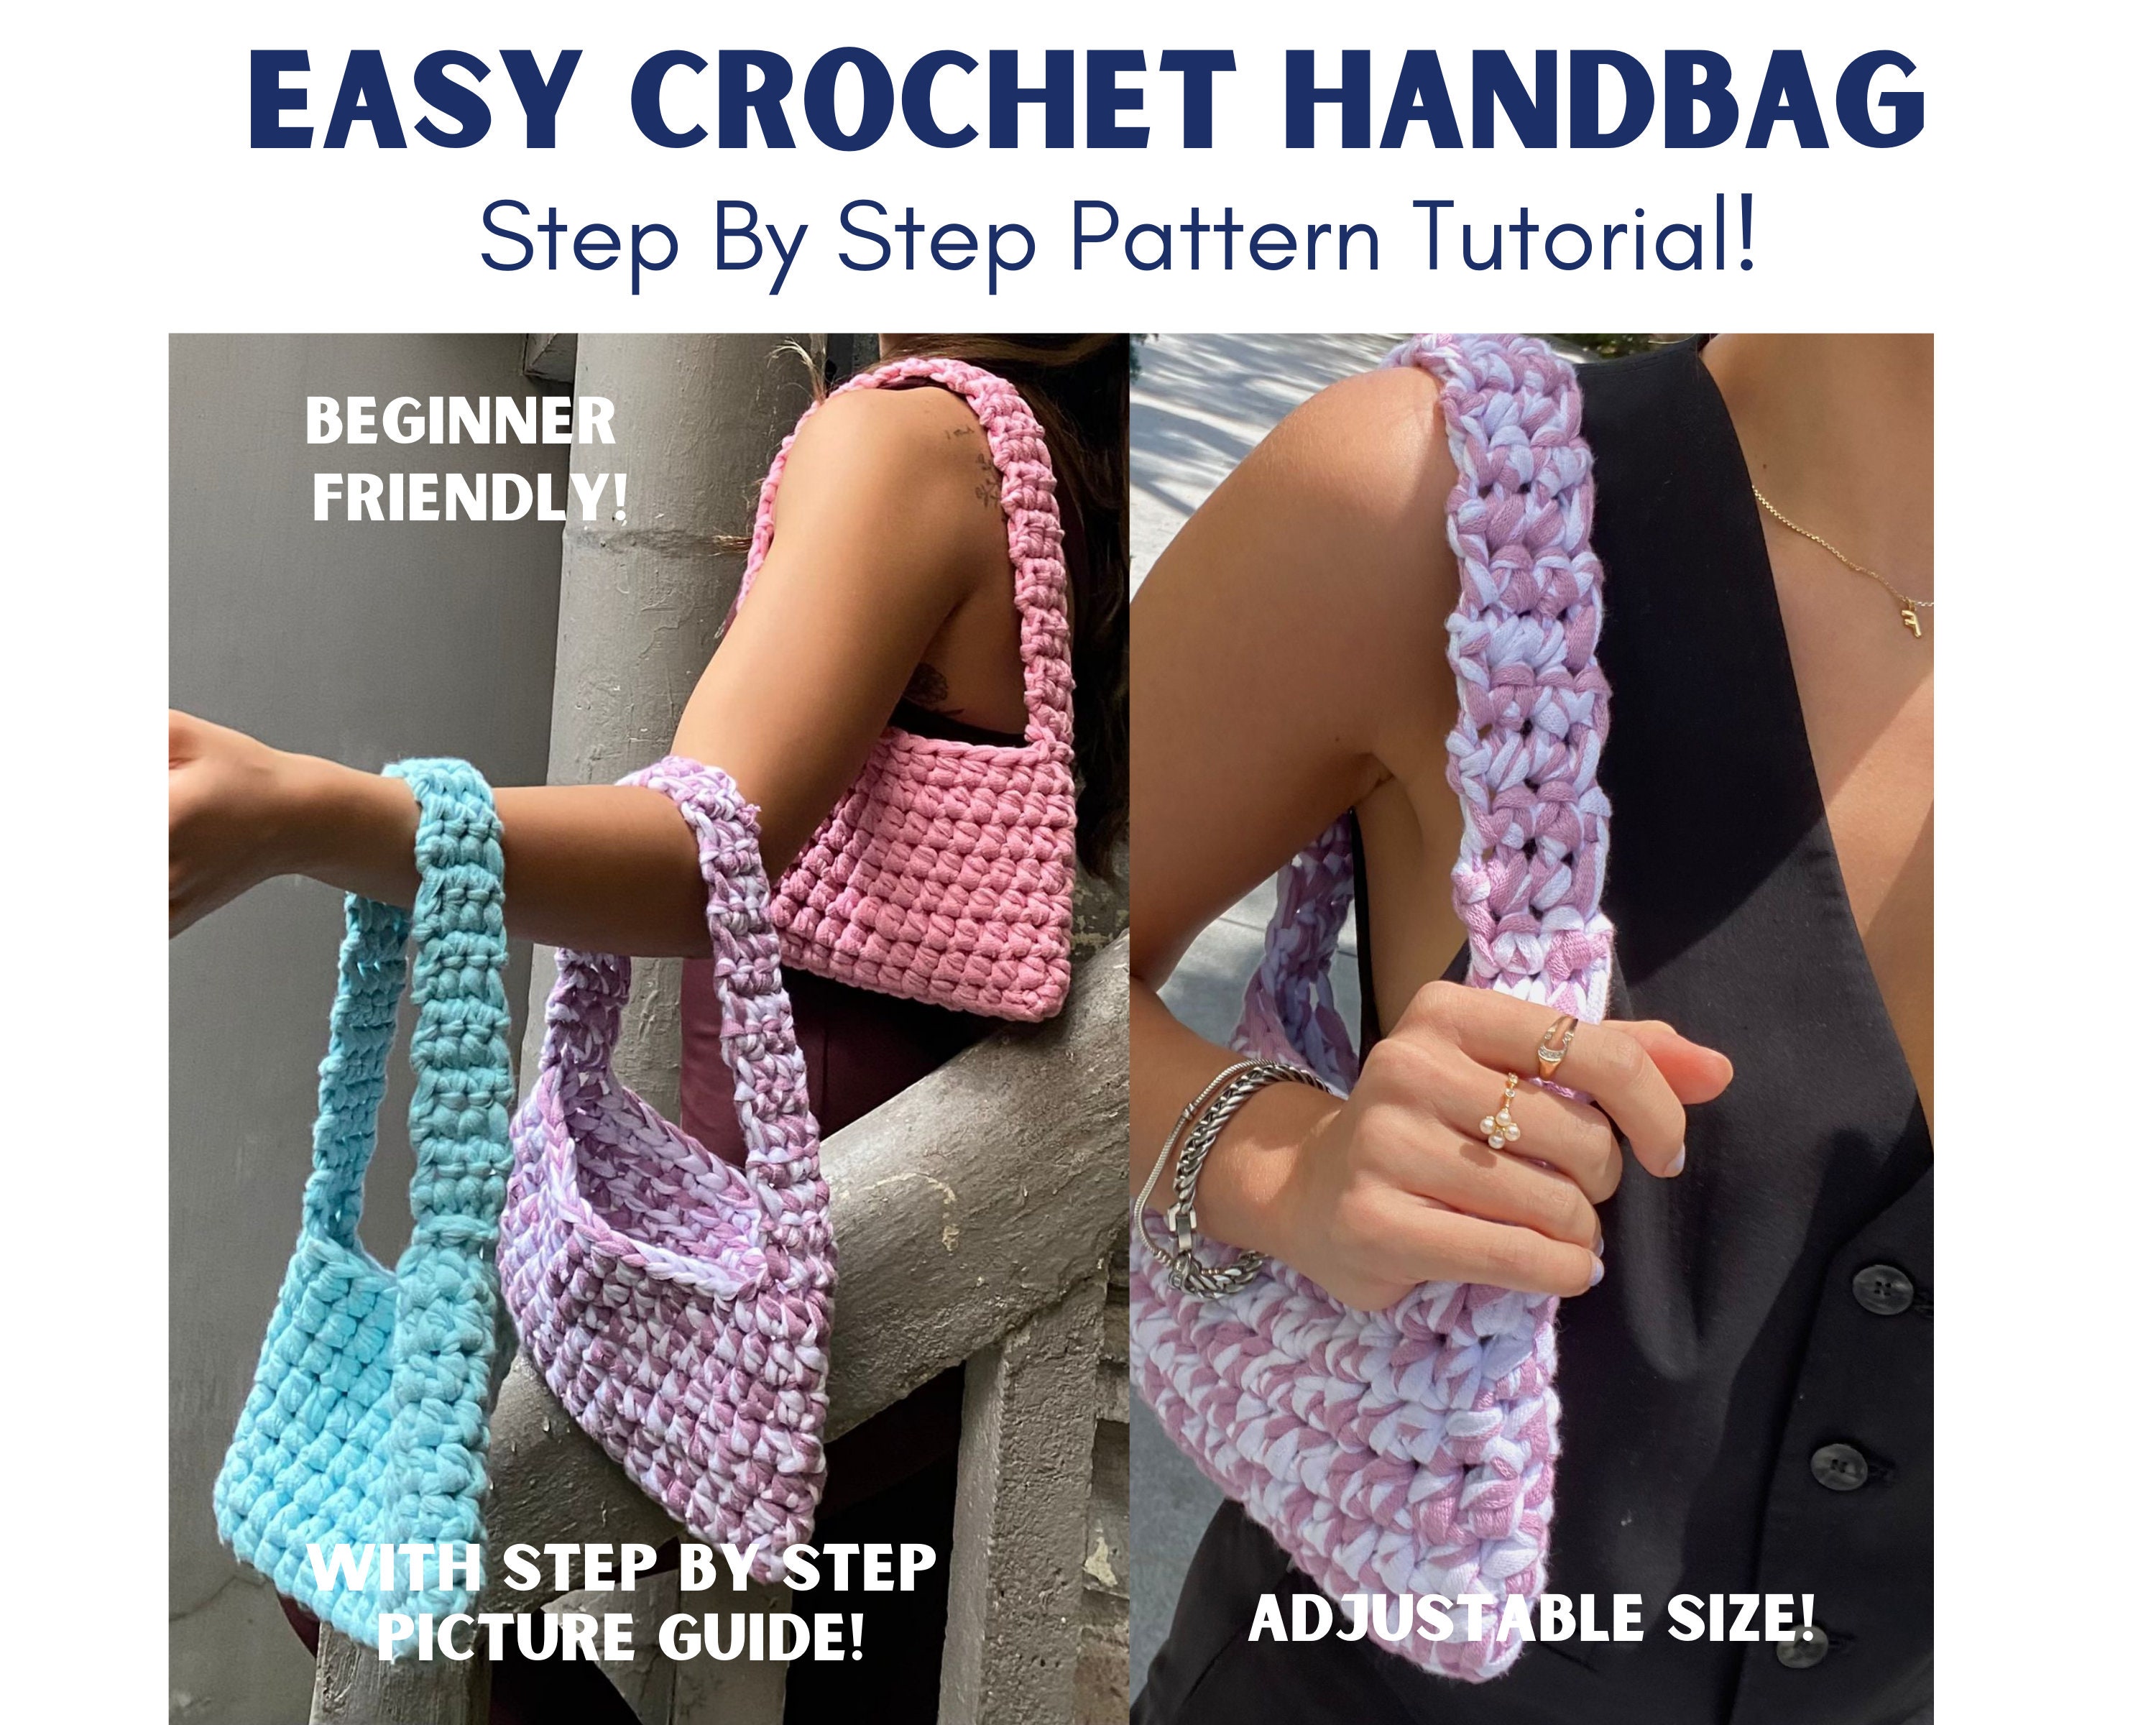 How to make bags like this sturdy? : r/crochet